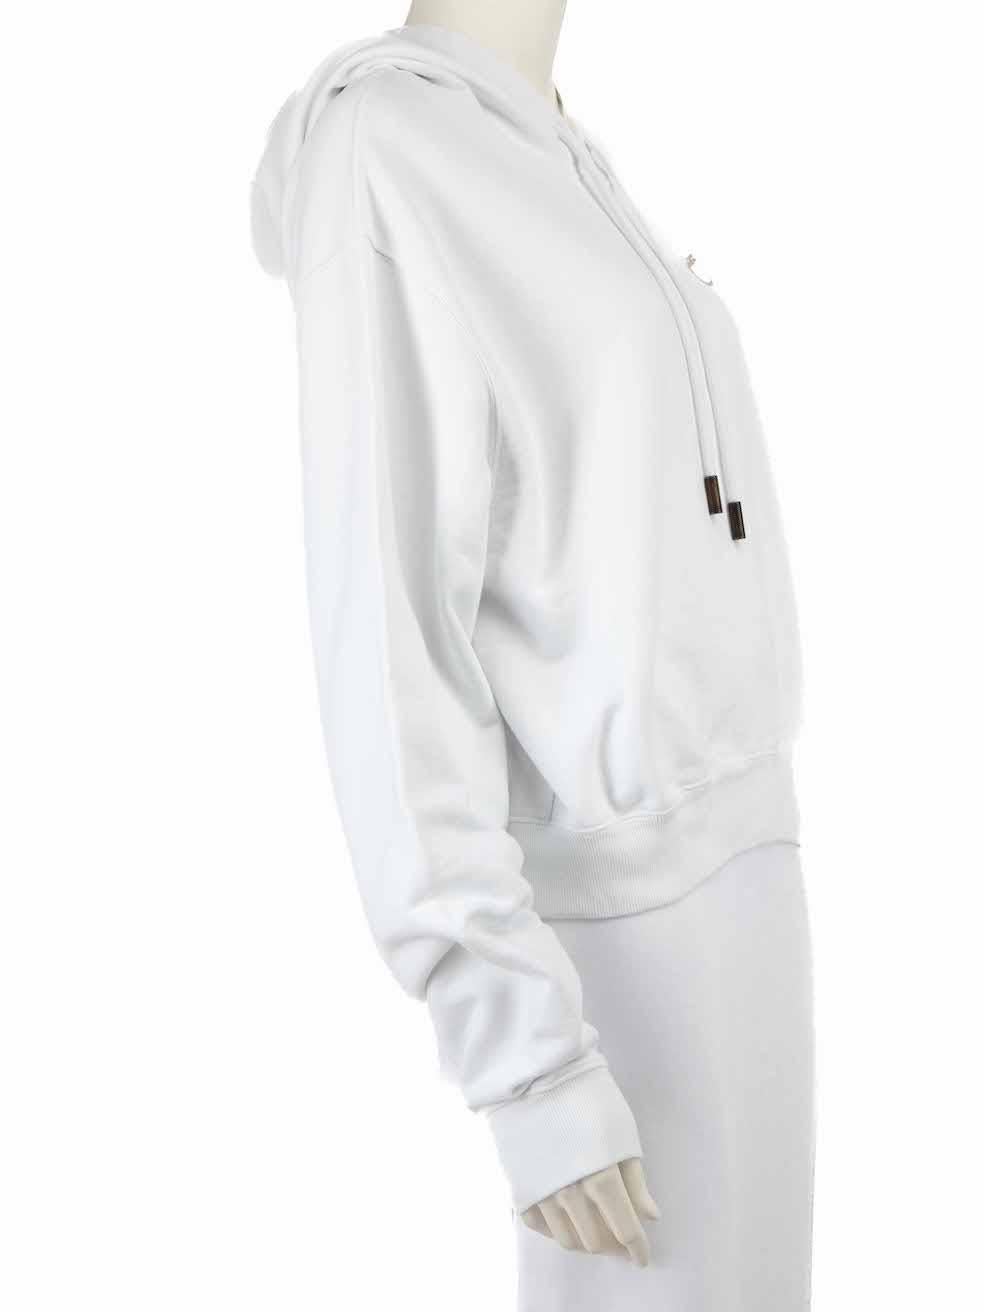 CONDITION is Very good. Minimal wear to hoodie is evident. Minimal wear to the left cuff and the neckline lining with discoloured marks on this used Off-White designer resale item.
 
 Details
 White
 Cotton
 Long sleeves hoodie
 Cropped length
